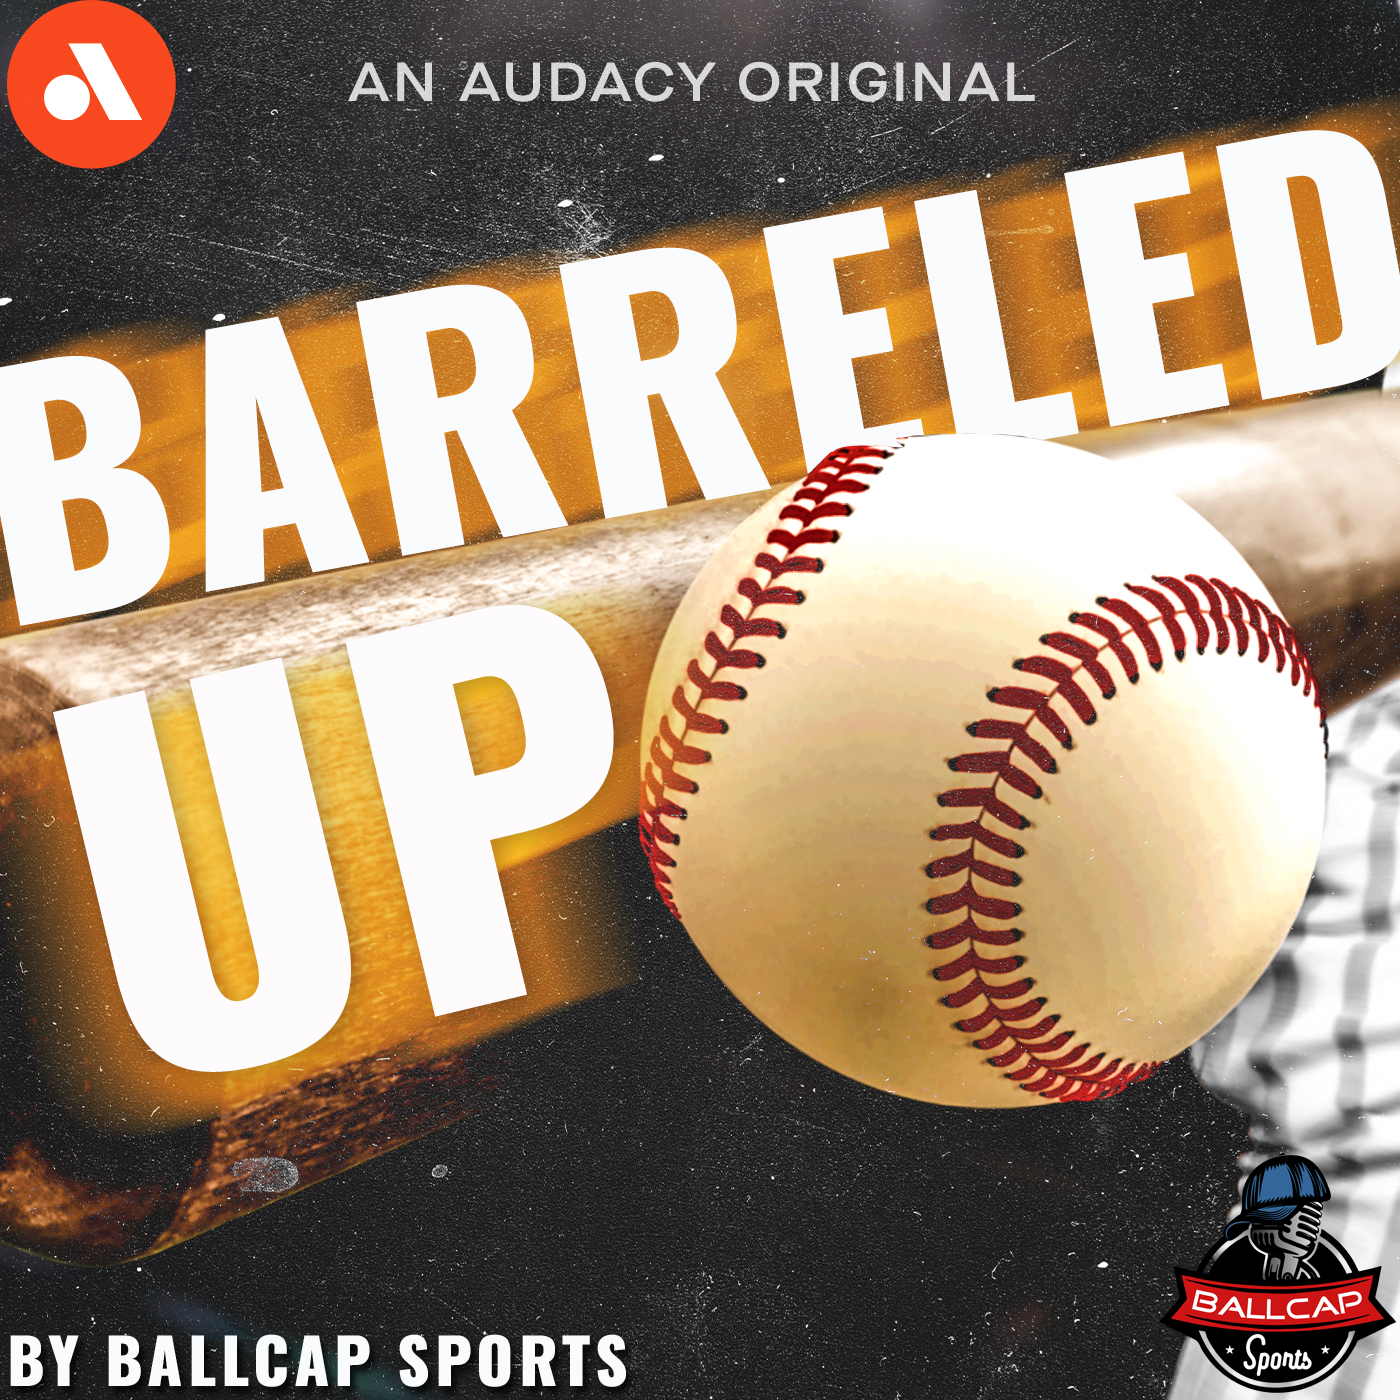 Can The Mets Win Without Kodai Senga...Is It Time To Panic? | 'Barreled Up'